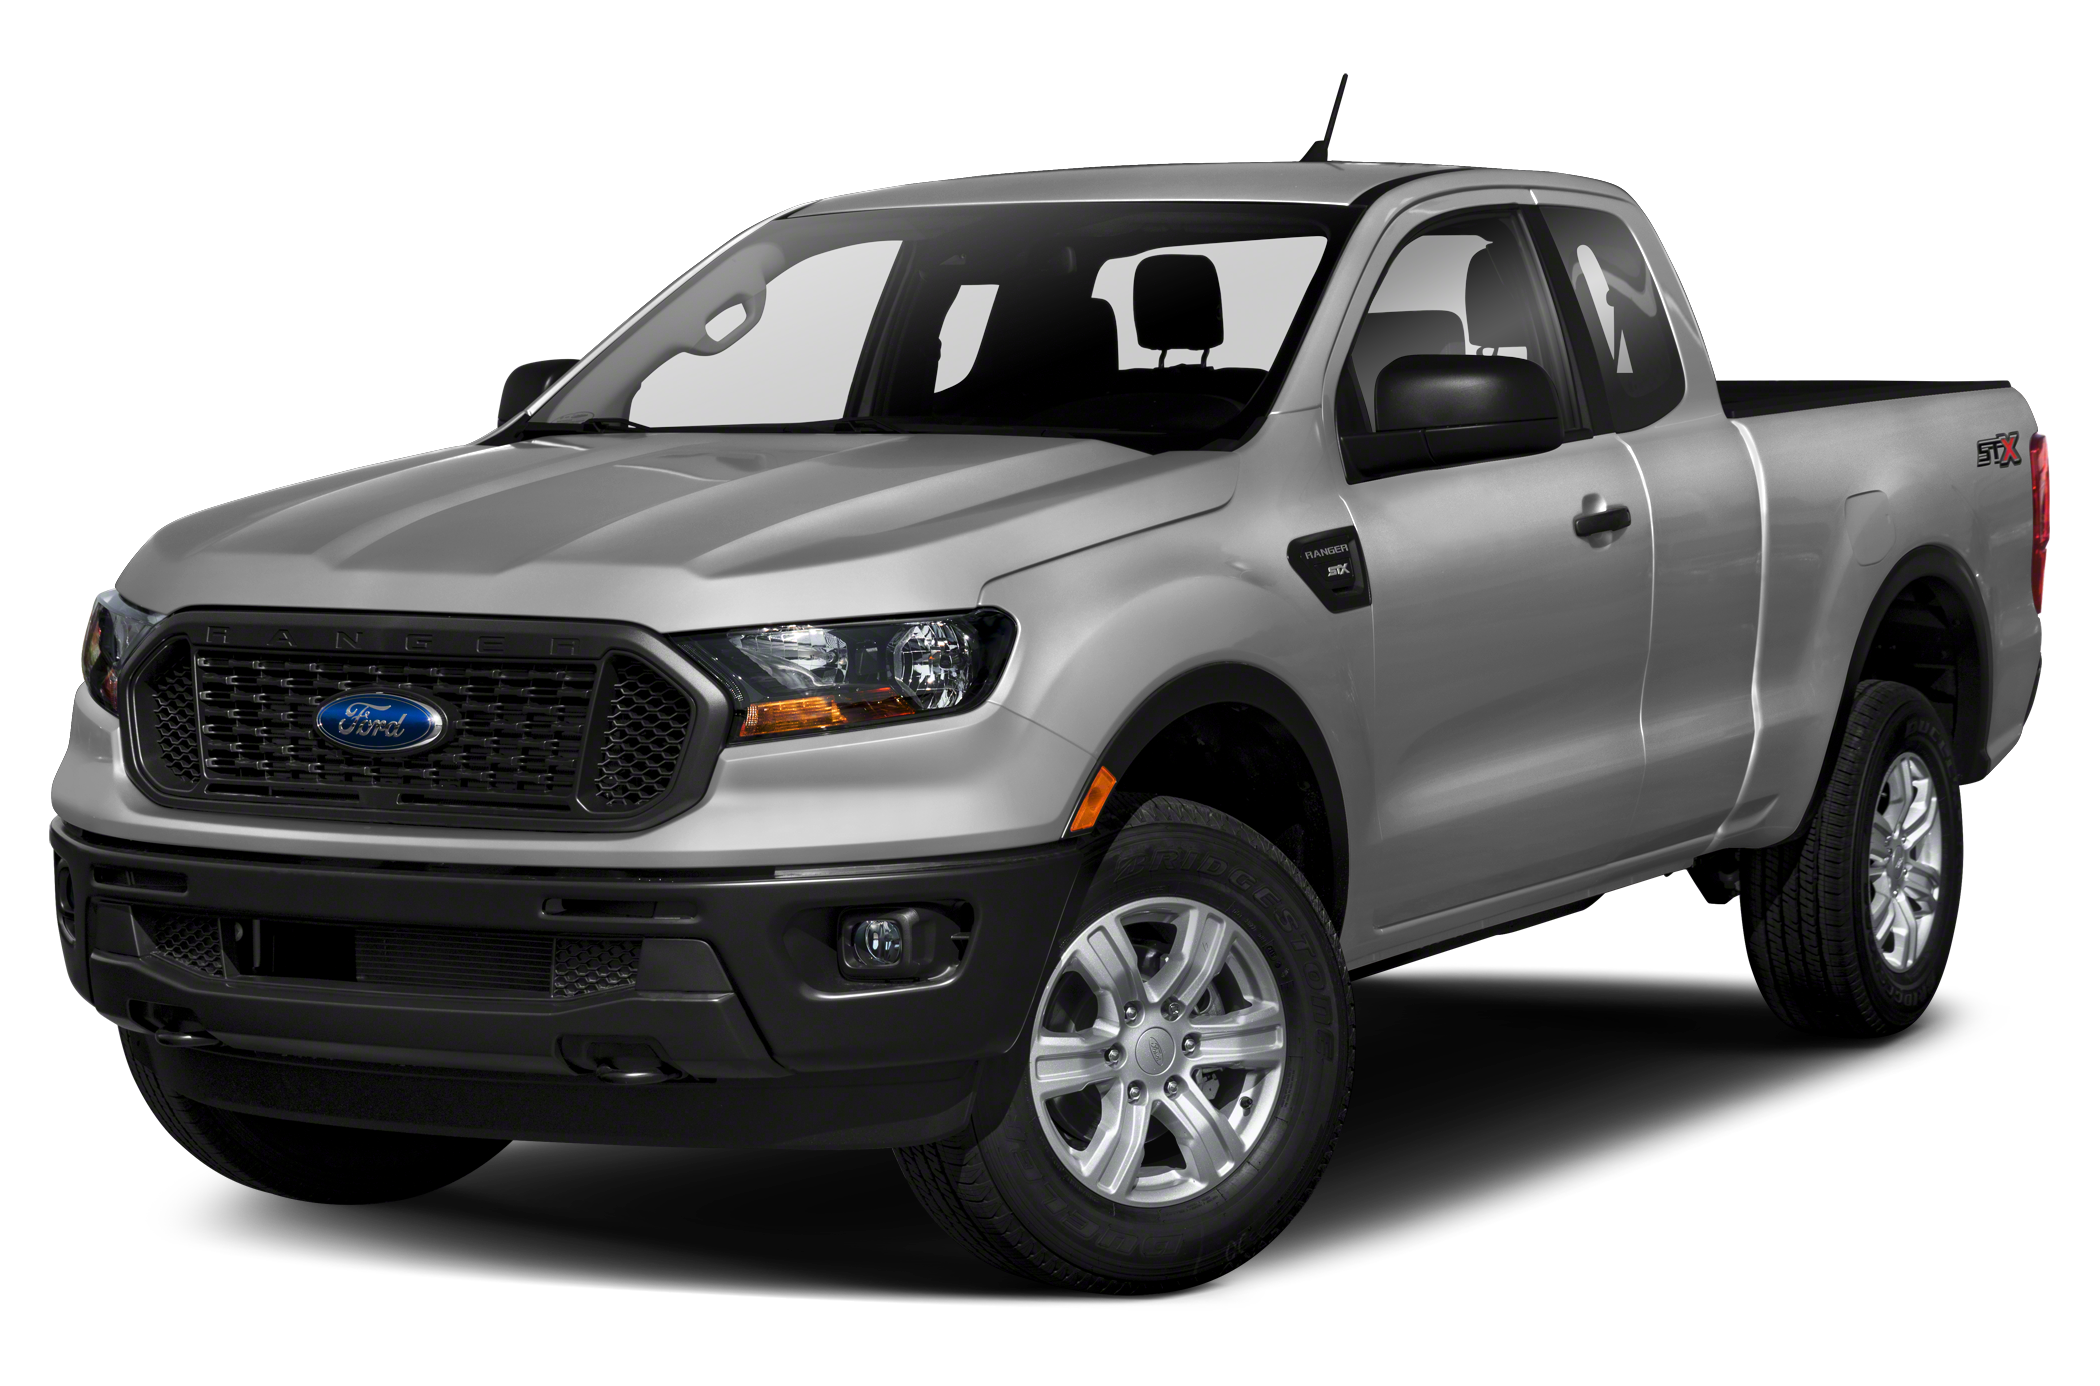 2020 Ford Ranger - View Specs, Prices & Photos - WHEELS.ca